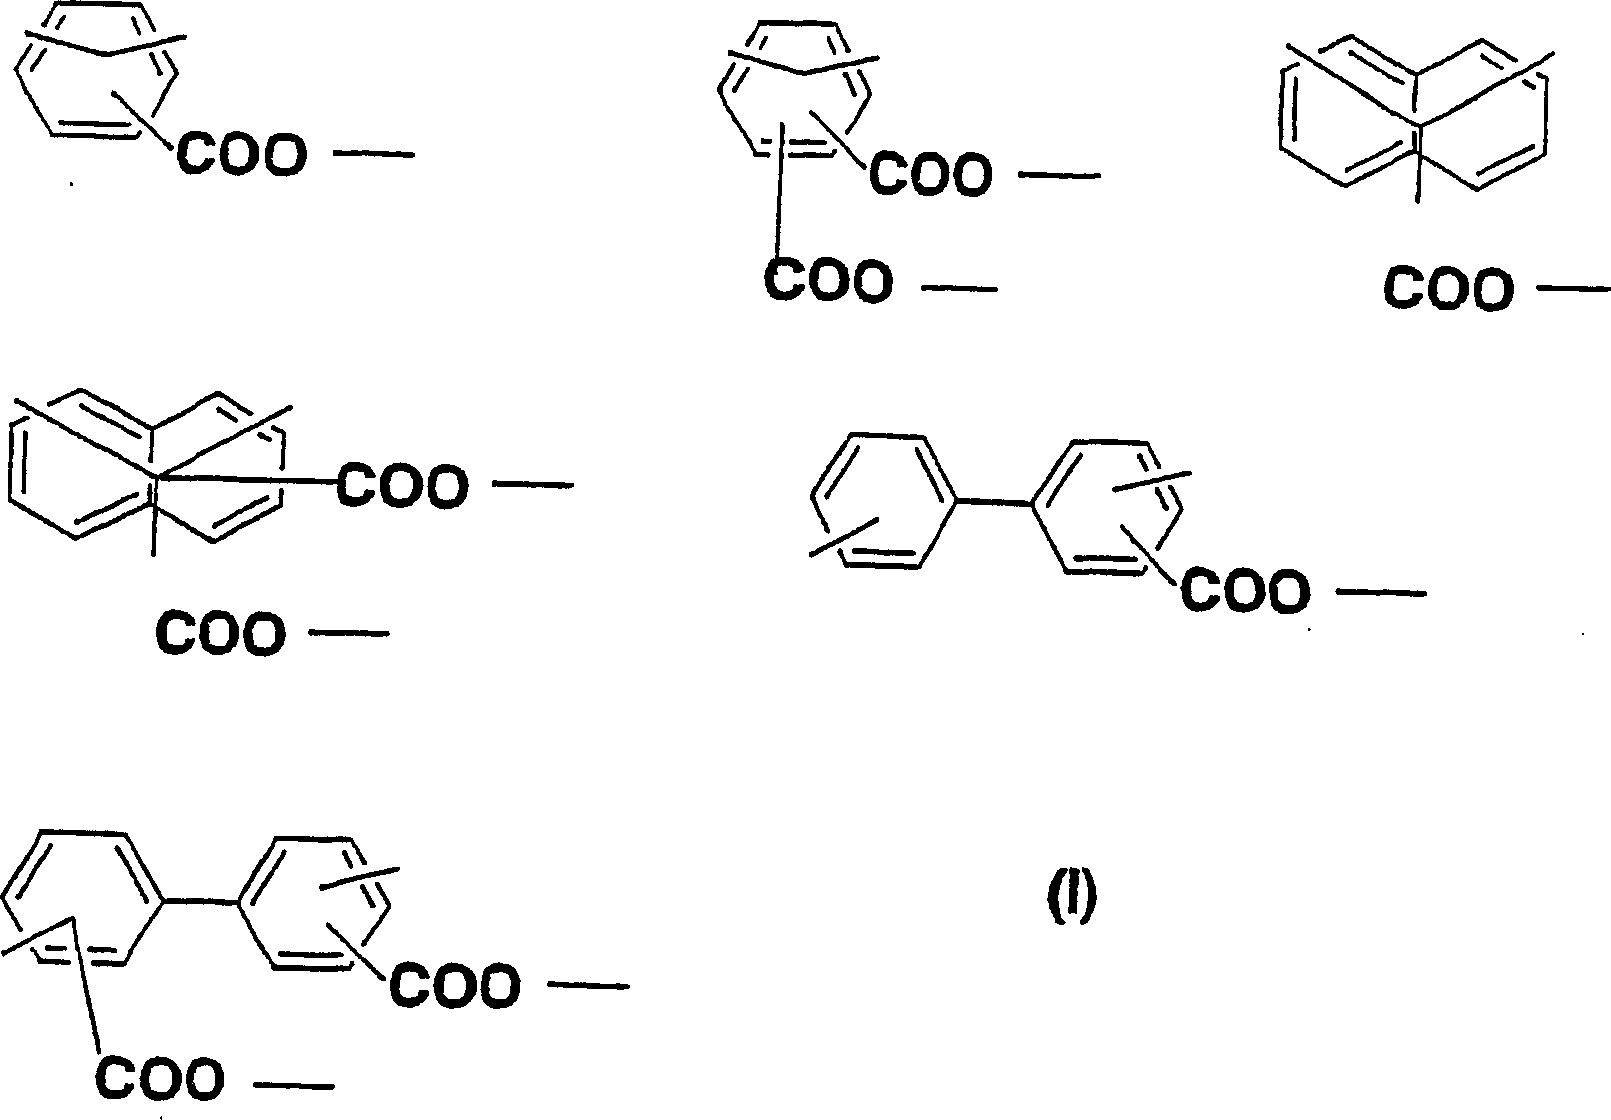 Diamine, acid dianhydride, polyimide composition having reactive group obtained therefrom, and processes for producing these